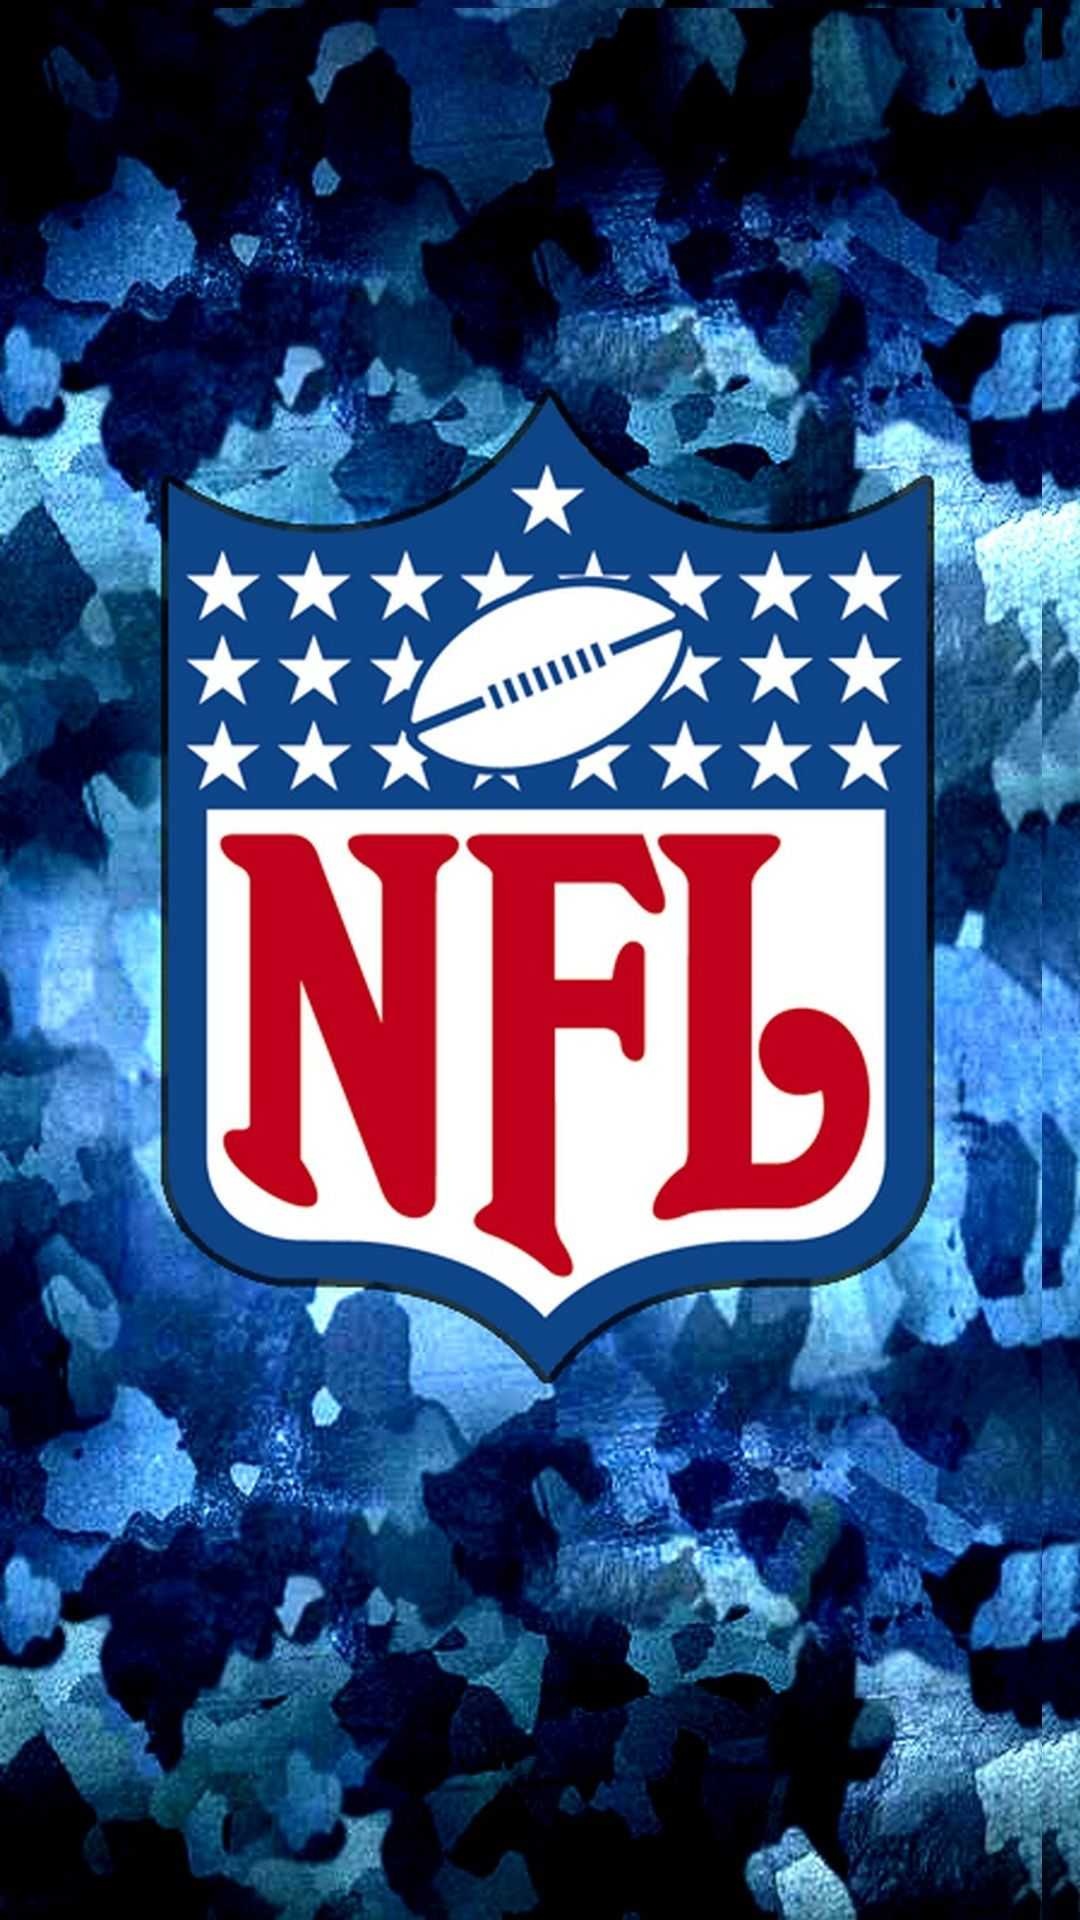 Football fanatics, Game day excitement, Jersey-clad crowd, NFL passion, 1080x1920 Full HD Handy